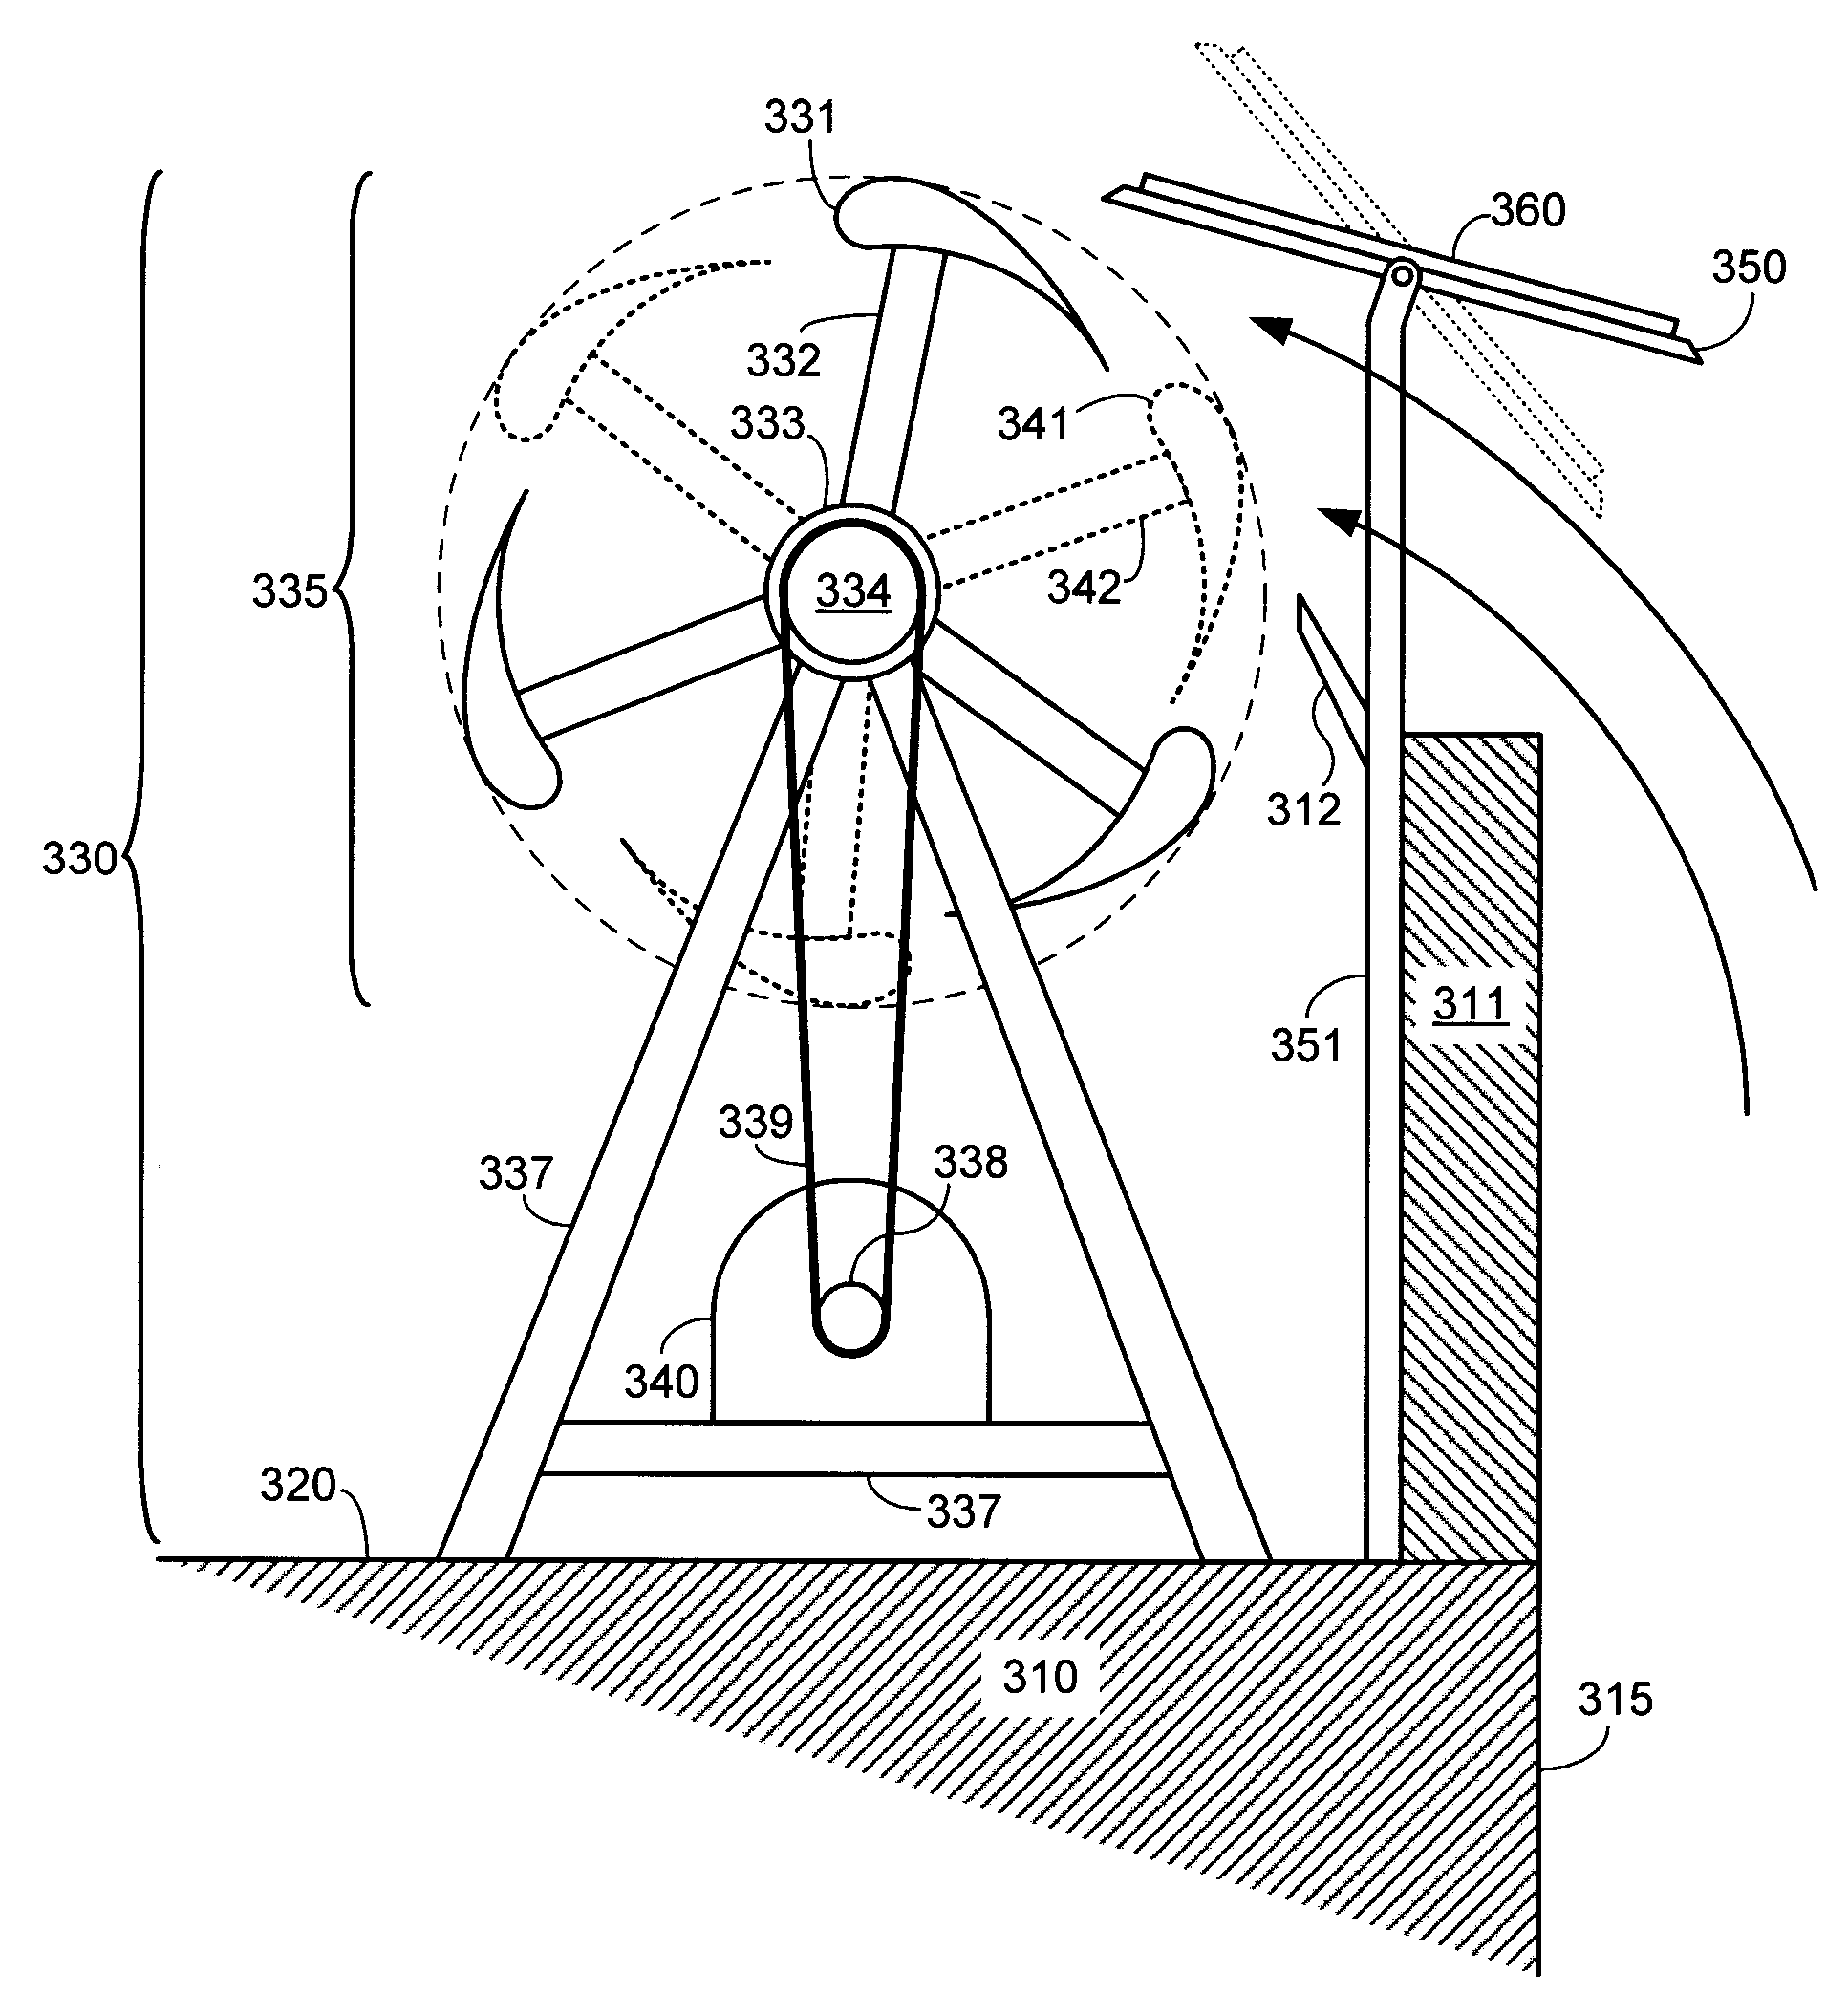 Wind turbine system for buildings